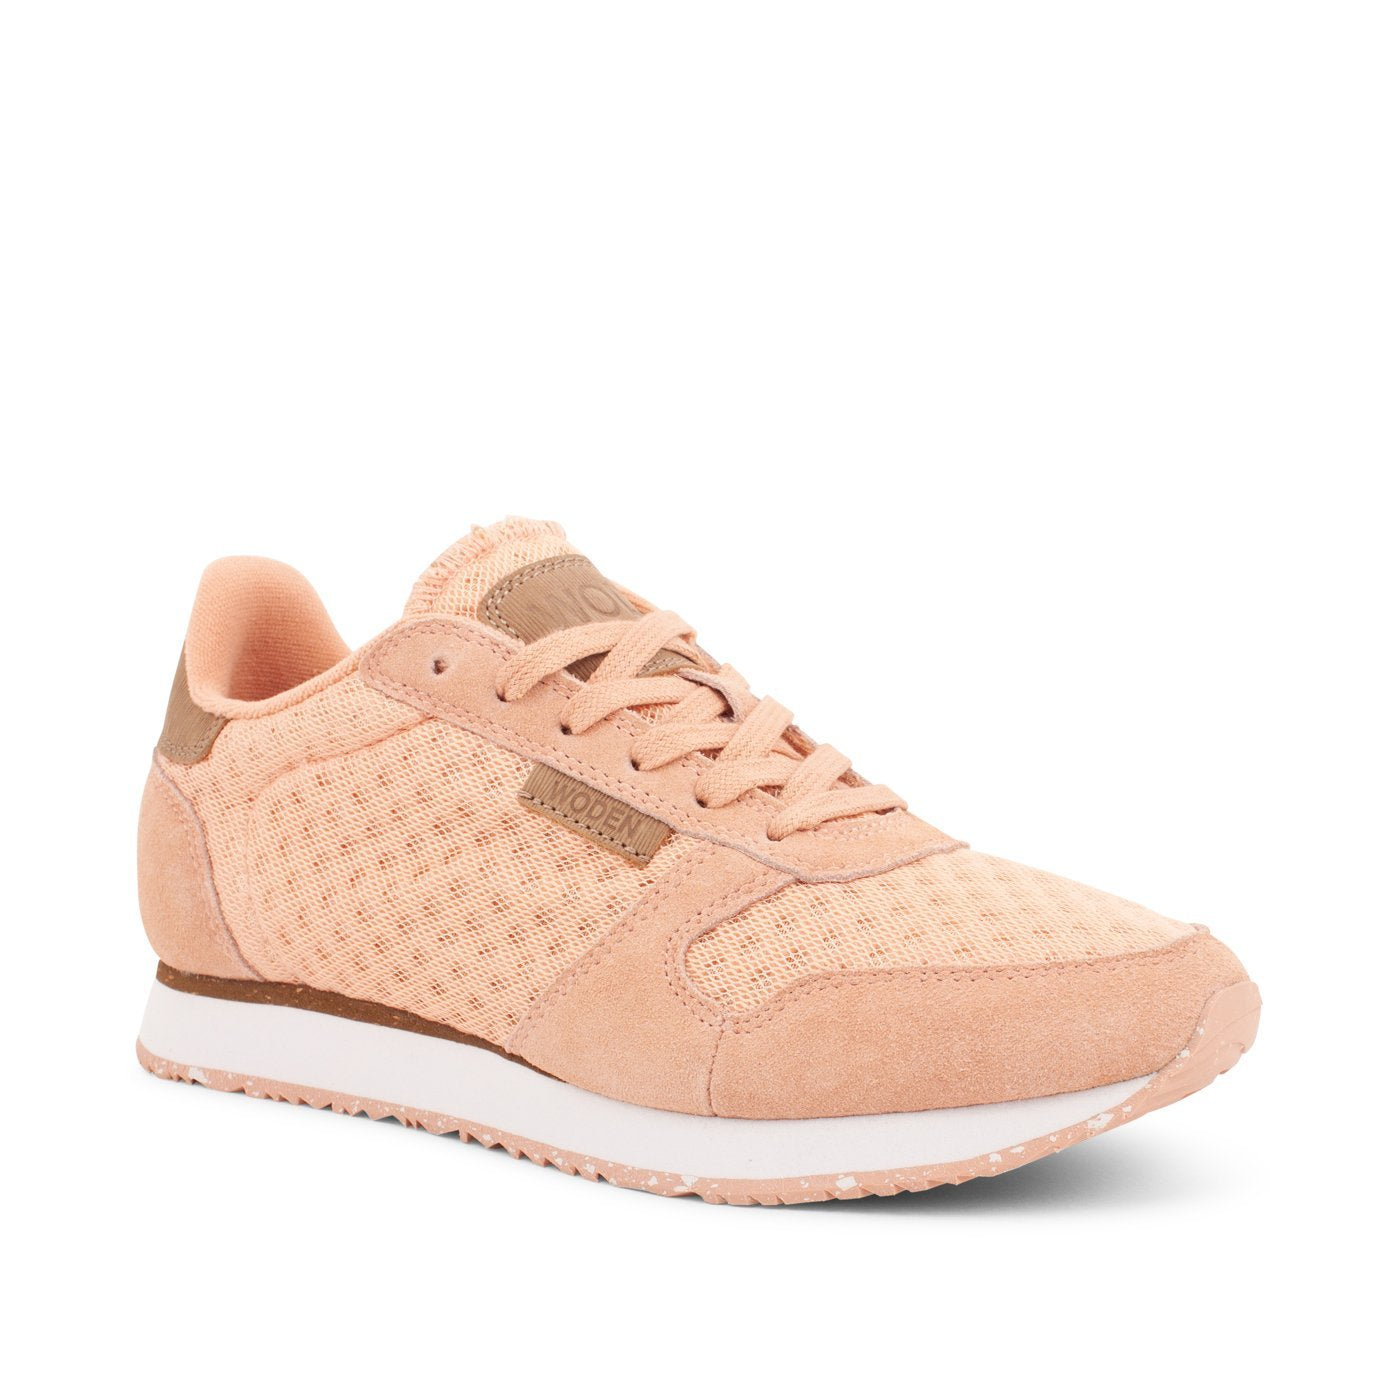 WODEN YDUN SUEDE MESH - PINK SAND - Collective Shoes 